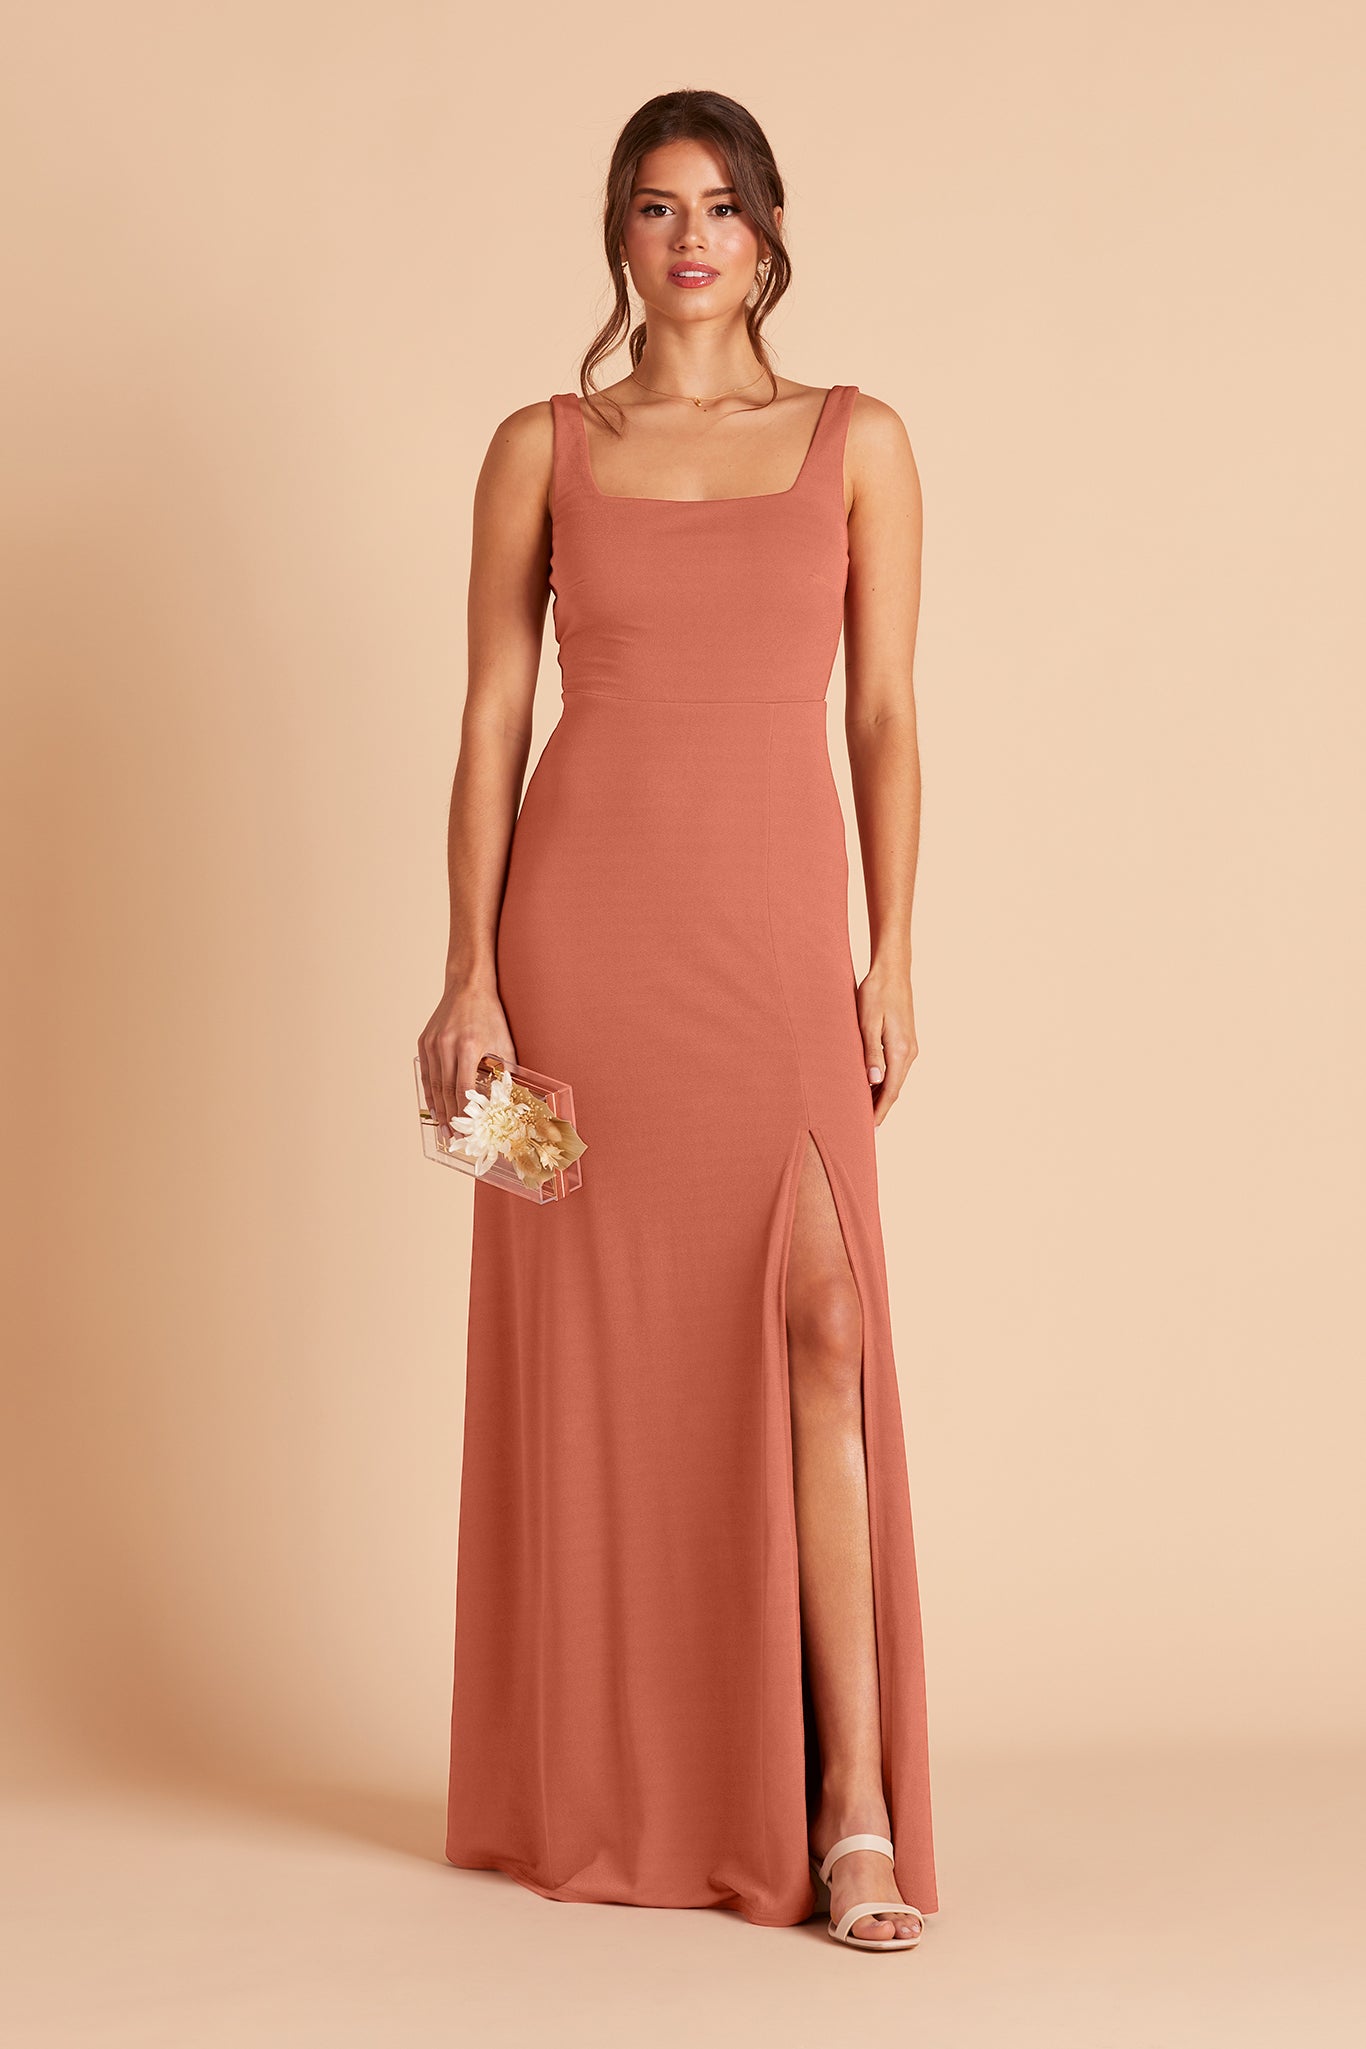 Alex convertible bridesmaid dress with slit in terracotta crepe by Birdy Grey, front view